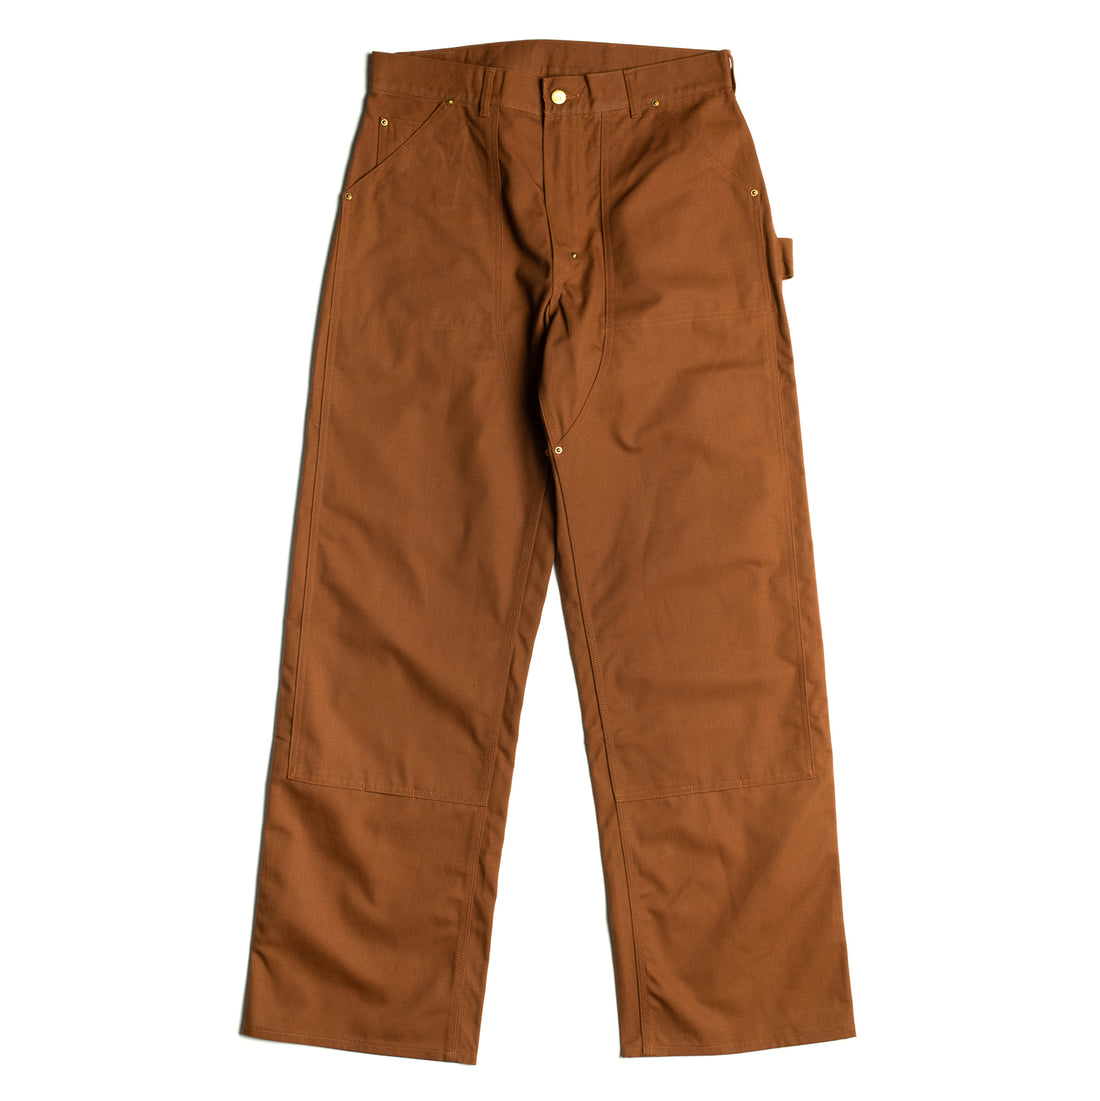 Bryceland’s Double Knee Pant Duck Cotton